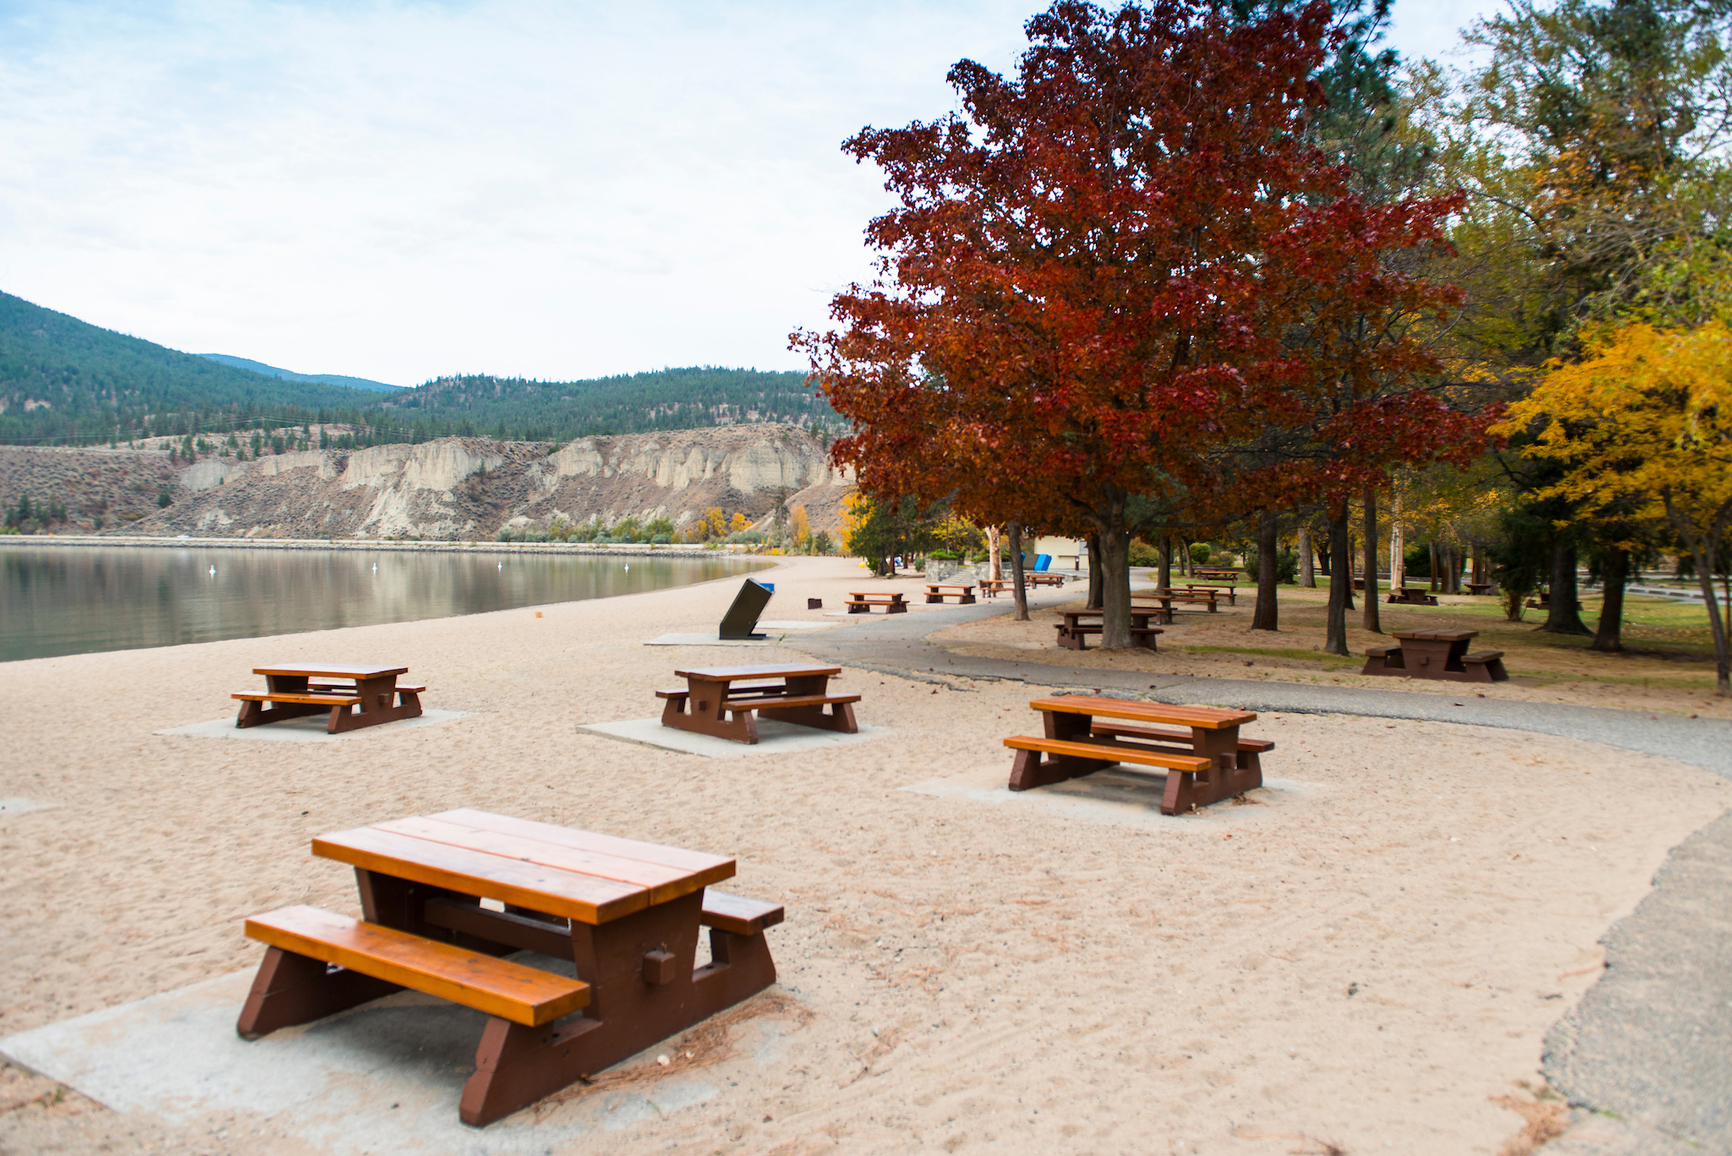 Vacant day use beach area with picnic tables and changing colour deciduous trees.